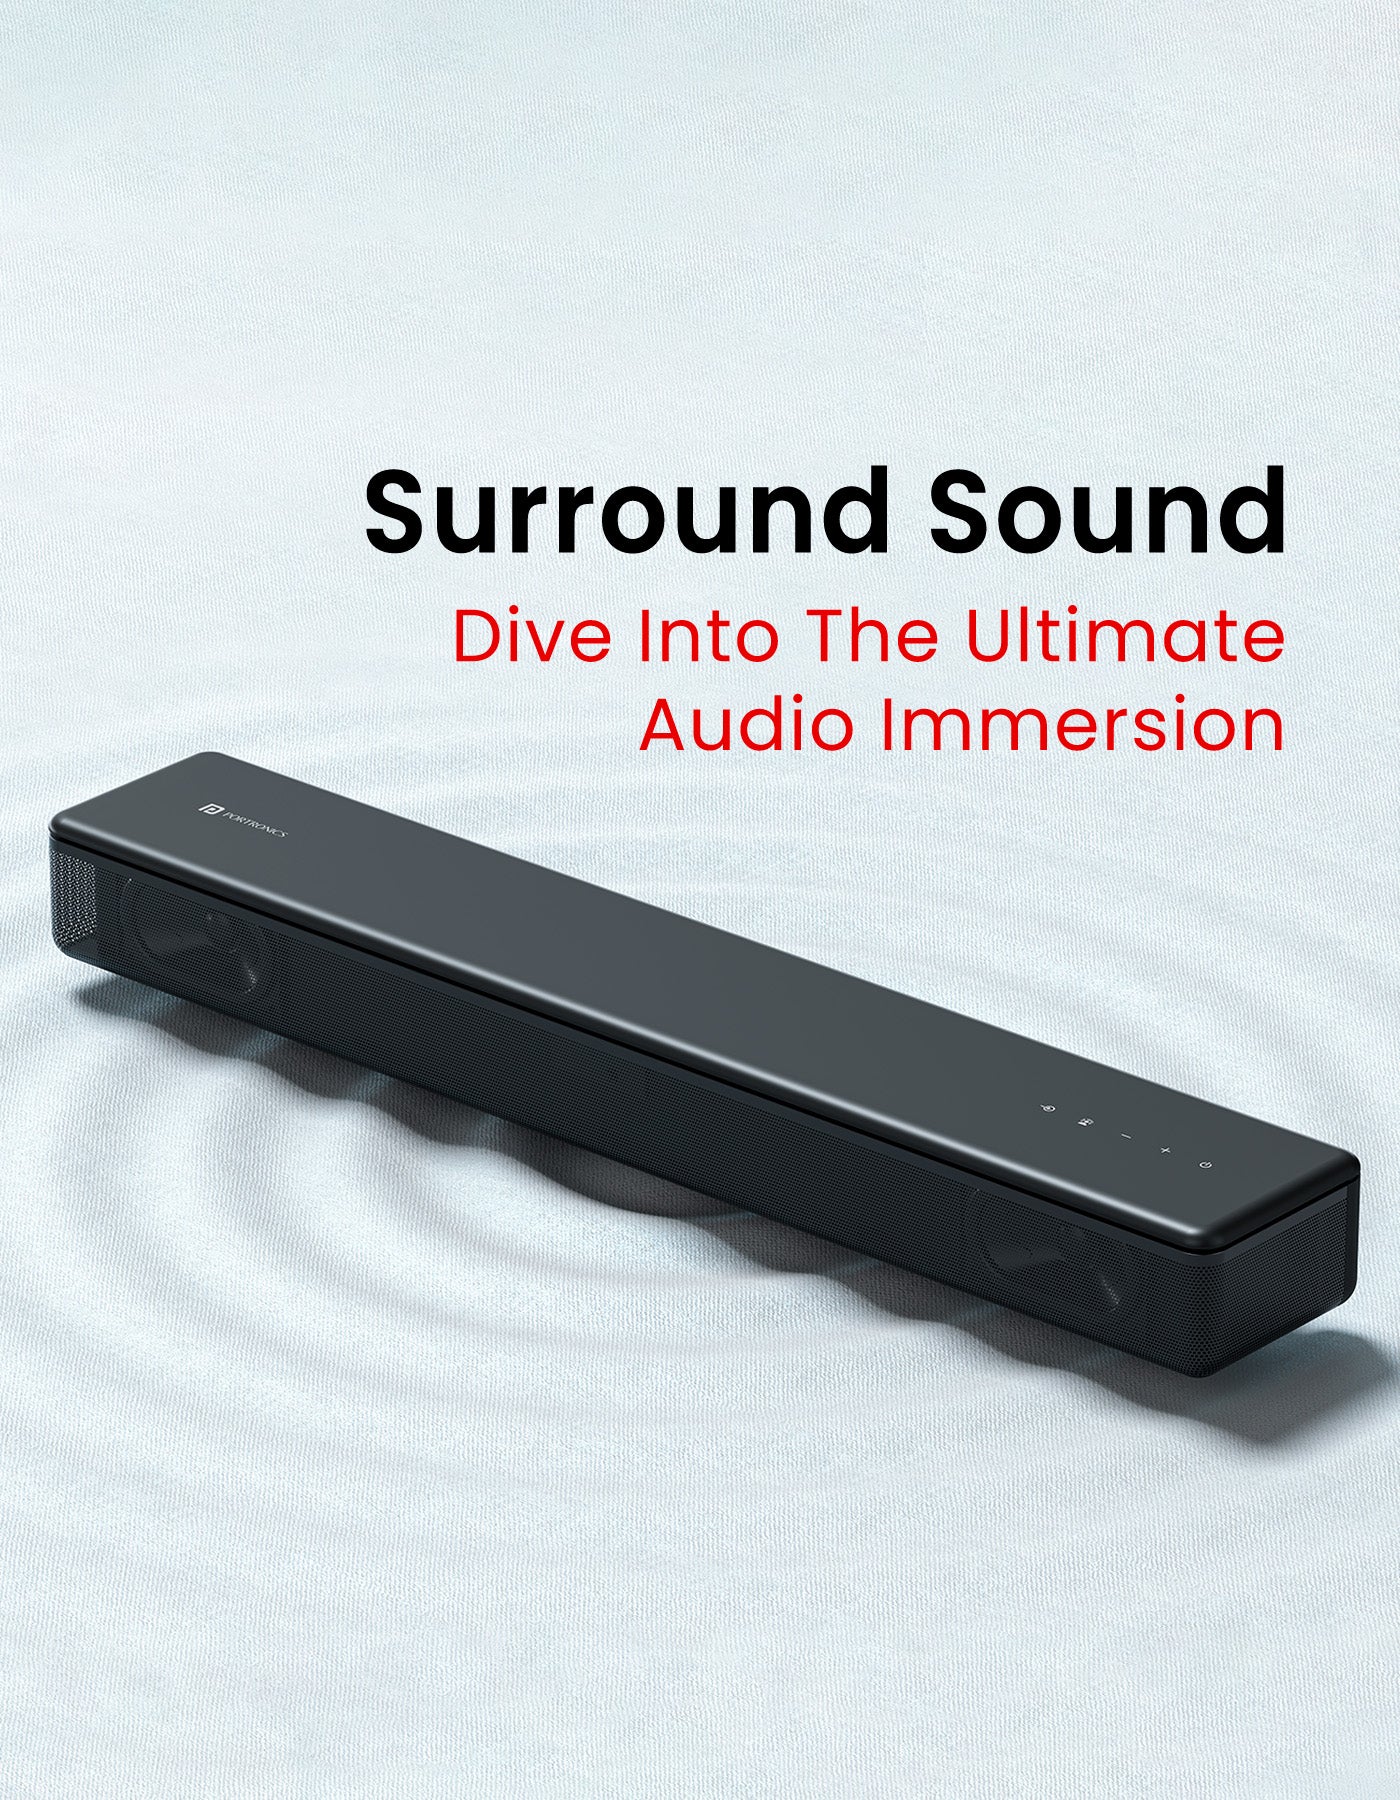 Portronics sound slick 8 sound bar speaker bluetooth with Multiple sound modes to suit your musical situations